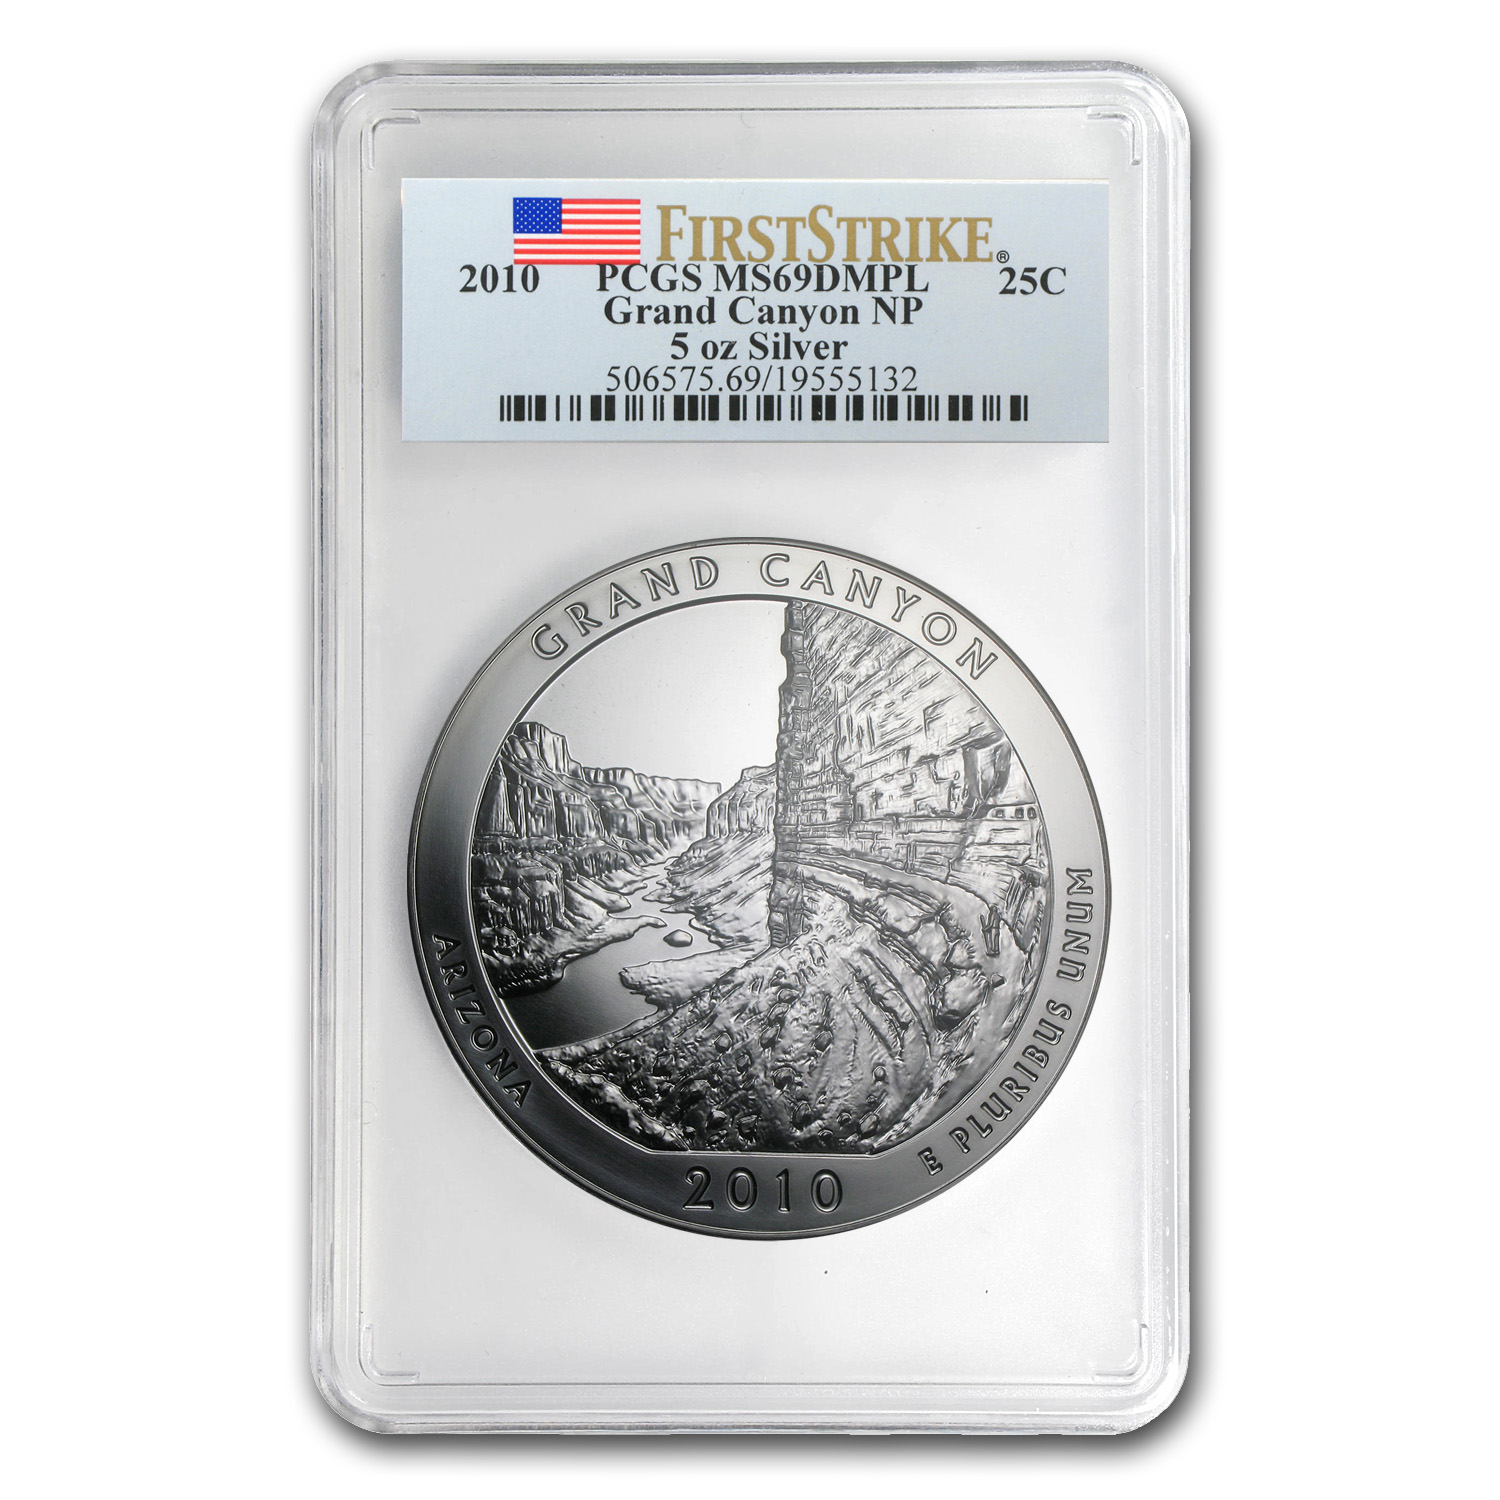 Buy 2010 5 oz Silver ATB Grand Canyon MS-69 DMPL PCGS (FirstStrike?)